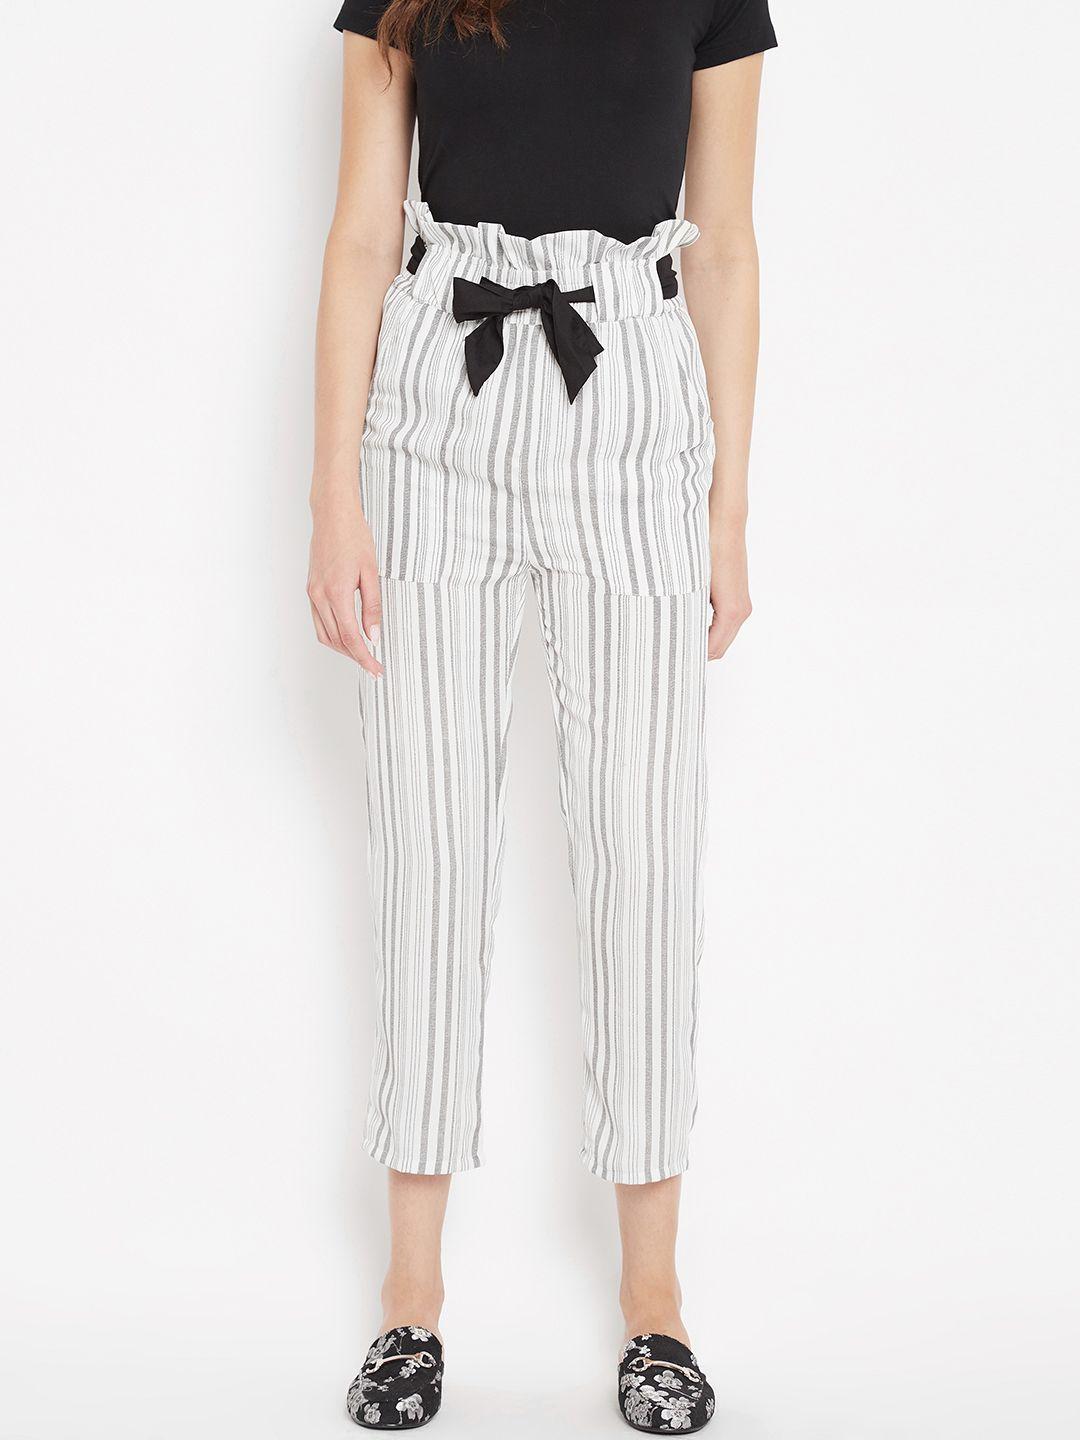 panit women off-white & black regular fit striped cropped trousers